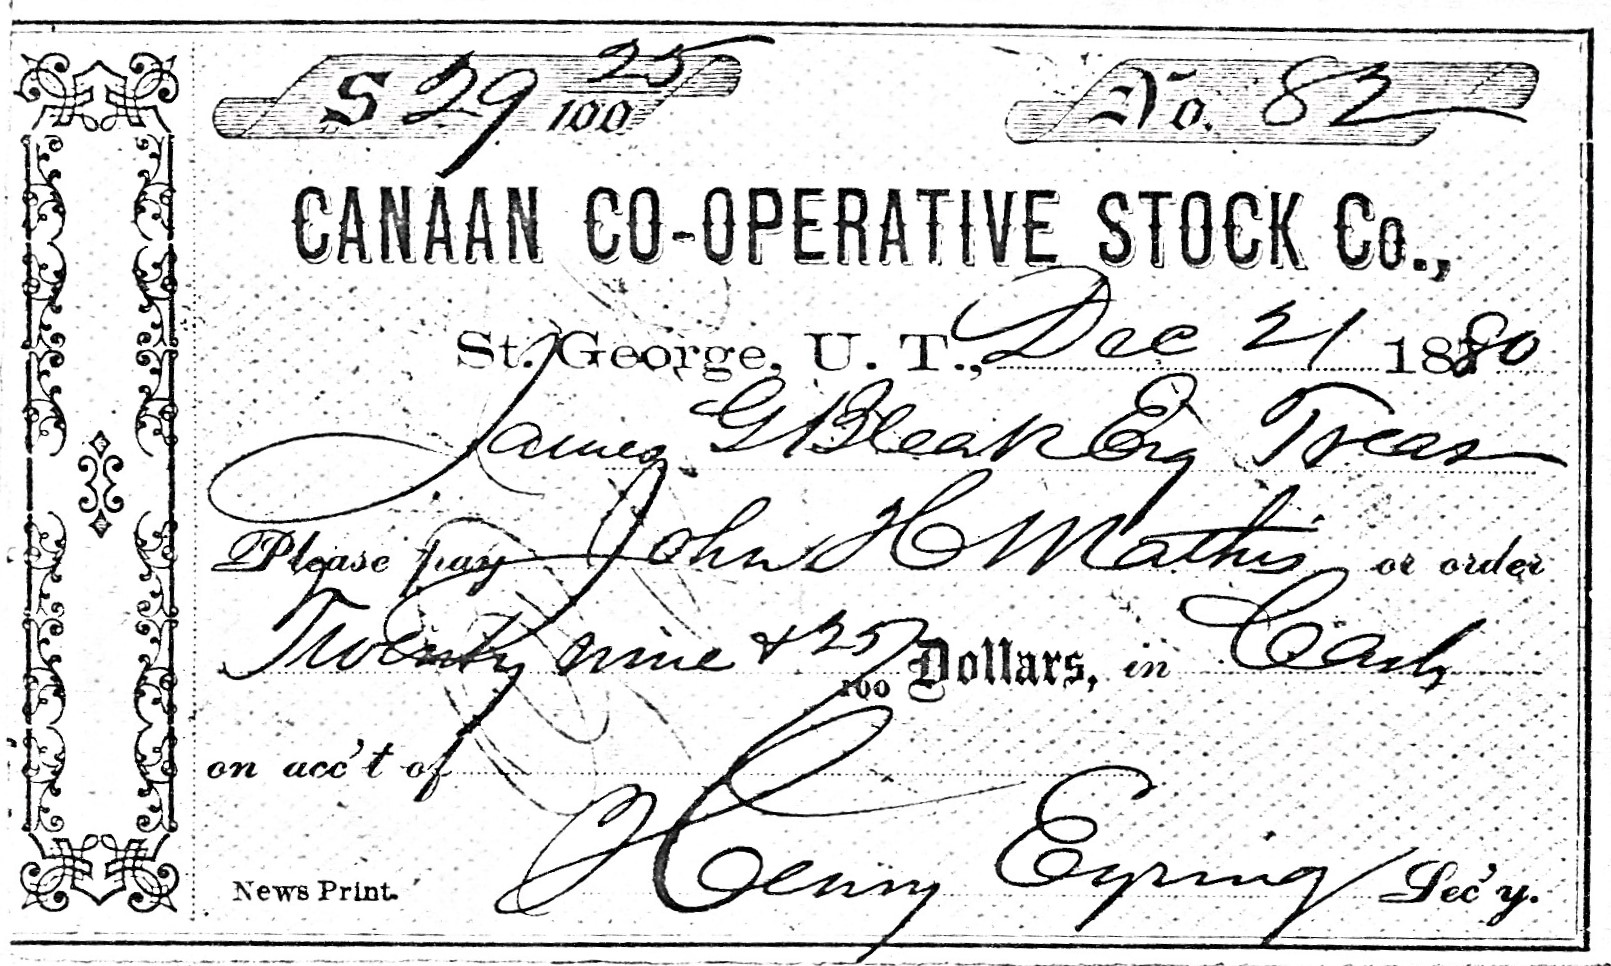 Canaan Co-Operative Stock Co. Currency